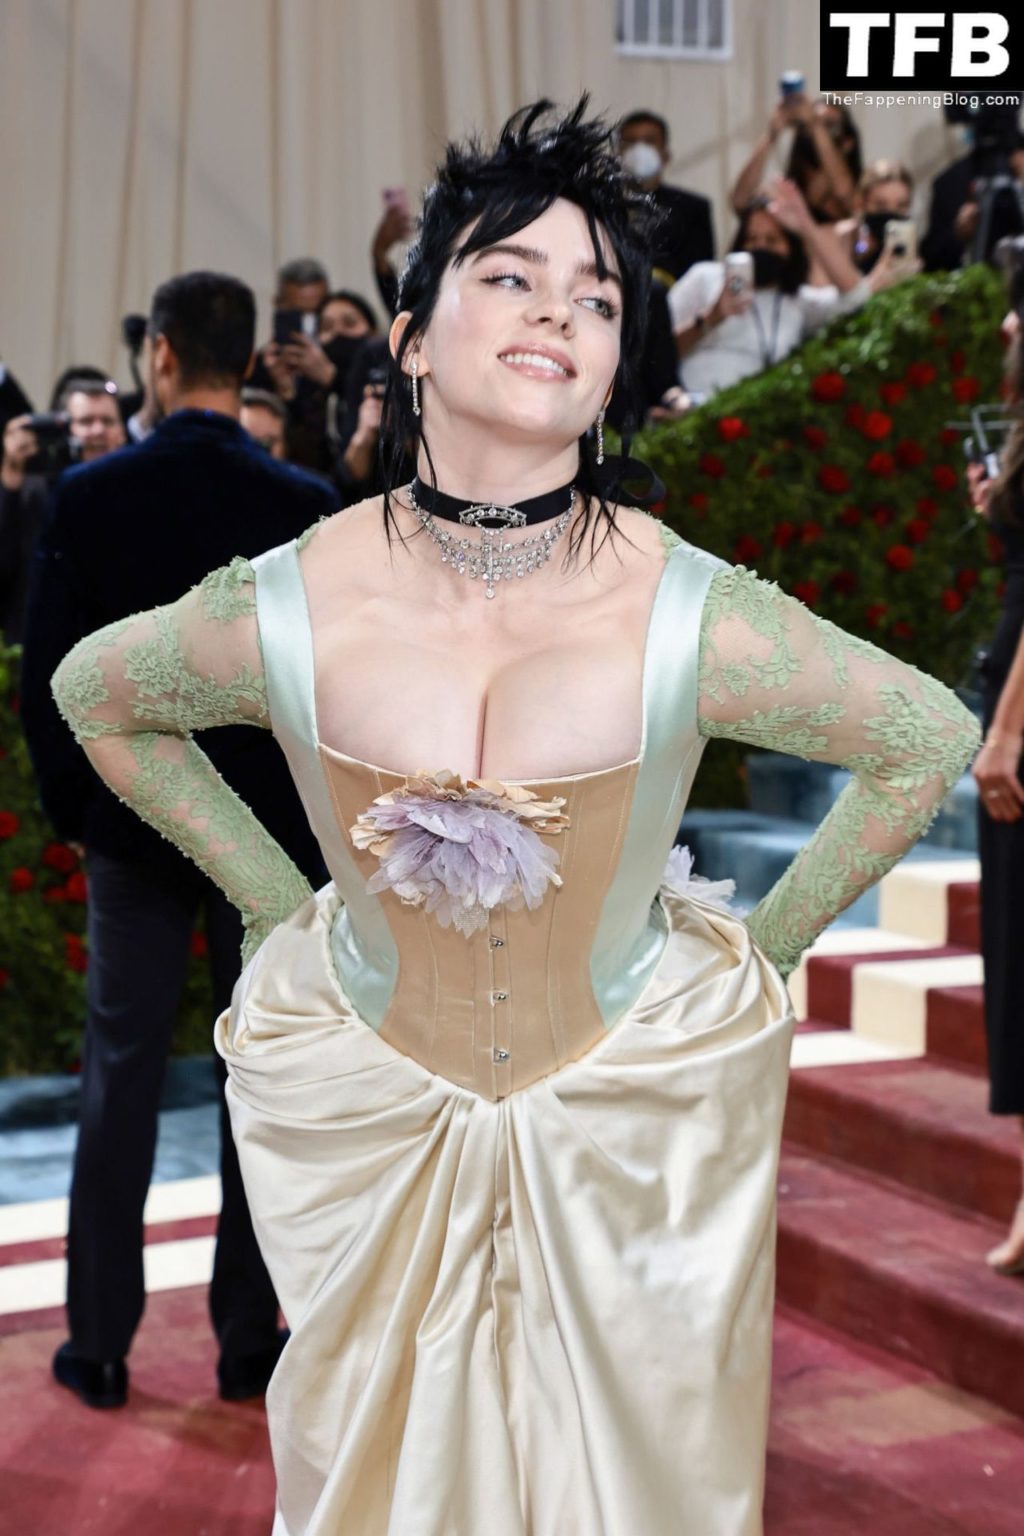 Billie Eilish Sexy The Fappening Blog 60 1024x1536 - Billie Eilish Showcases Nice Cleavage at The 2022 Met Gala in NYC (155 Photos)